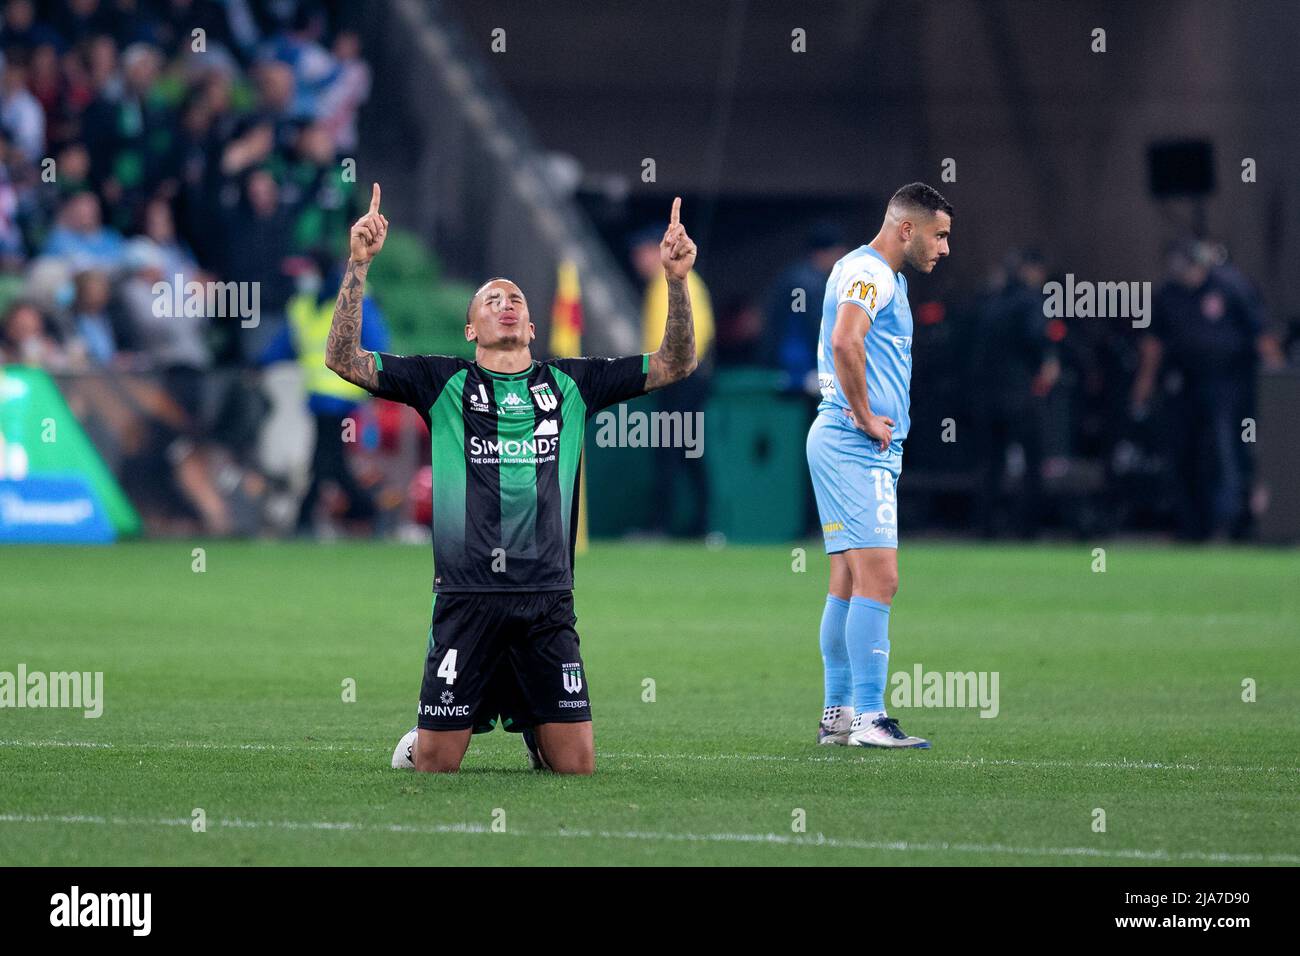 Melbourne, Australia, 28 May, 2022. Leo Lacroix of Western United celebrates after winning the A-League Grand Final soccer match between Melbourne City FC and Western United at AAMI Park on May 28, 2022 in Melbourne, Australia. Credit: Mikko Robles/Speed Media/Alamy Live News Stock Photo